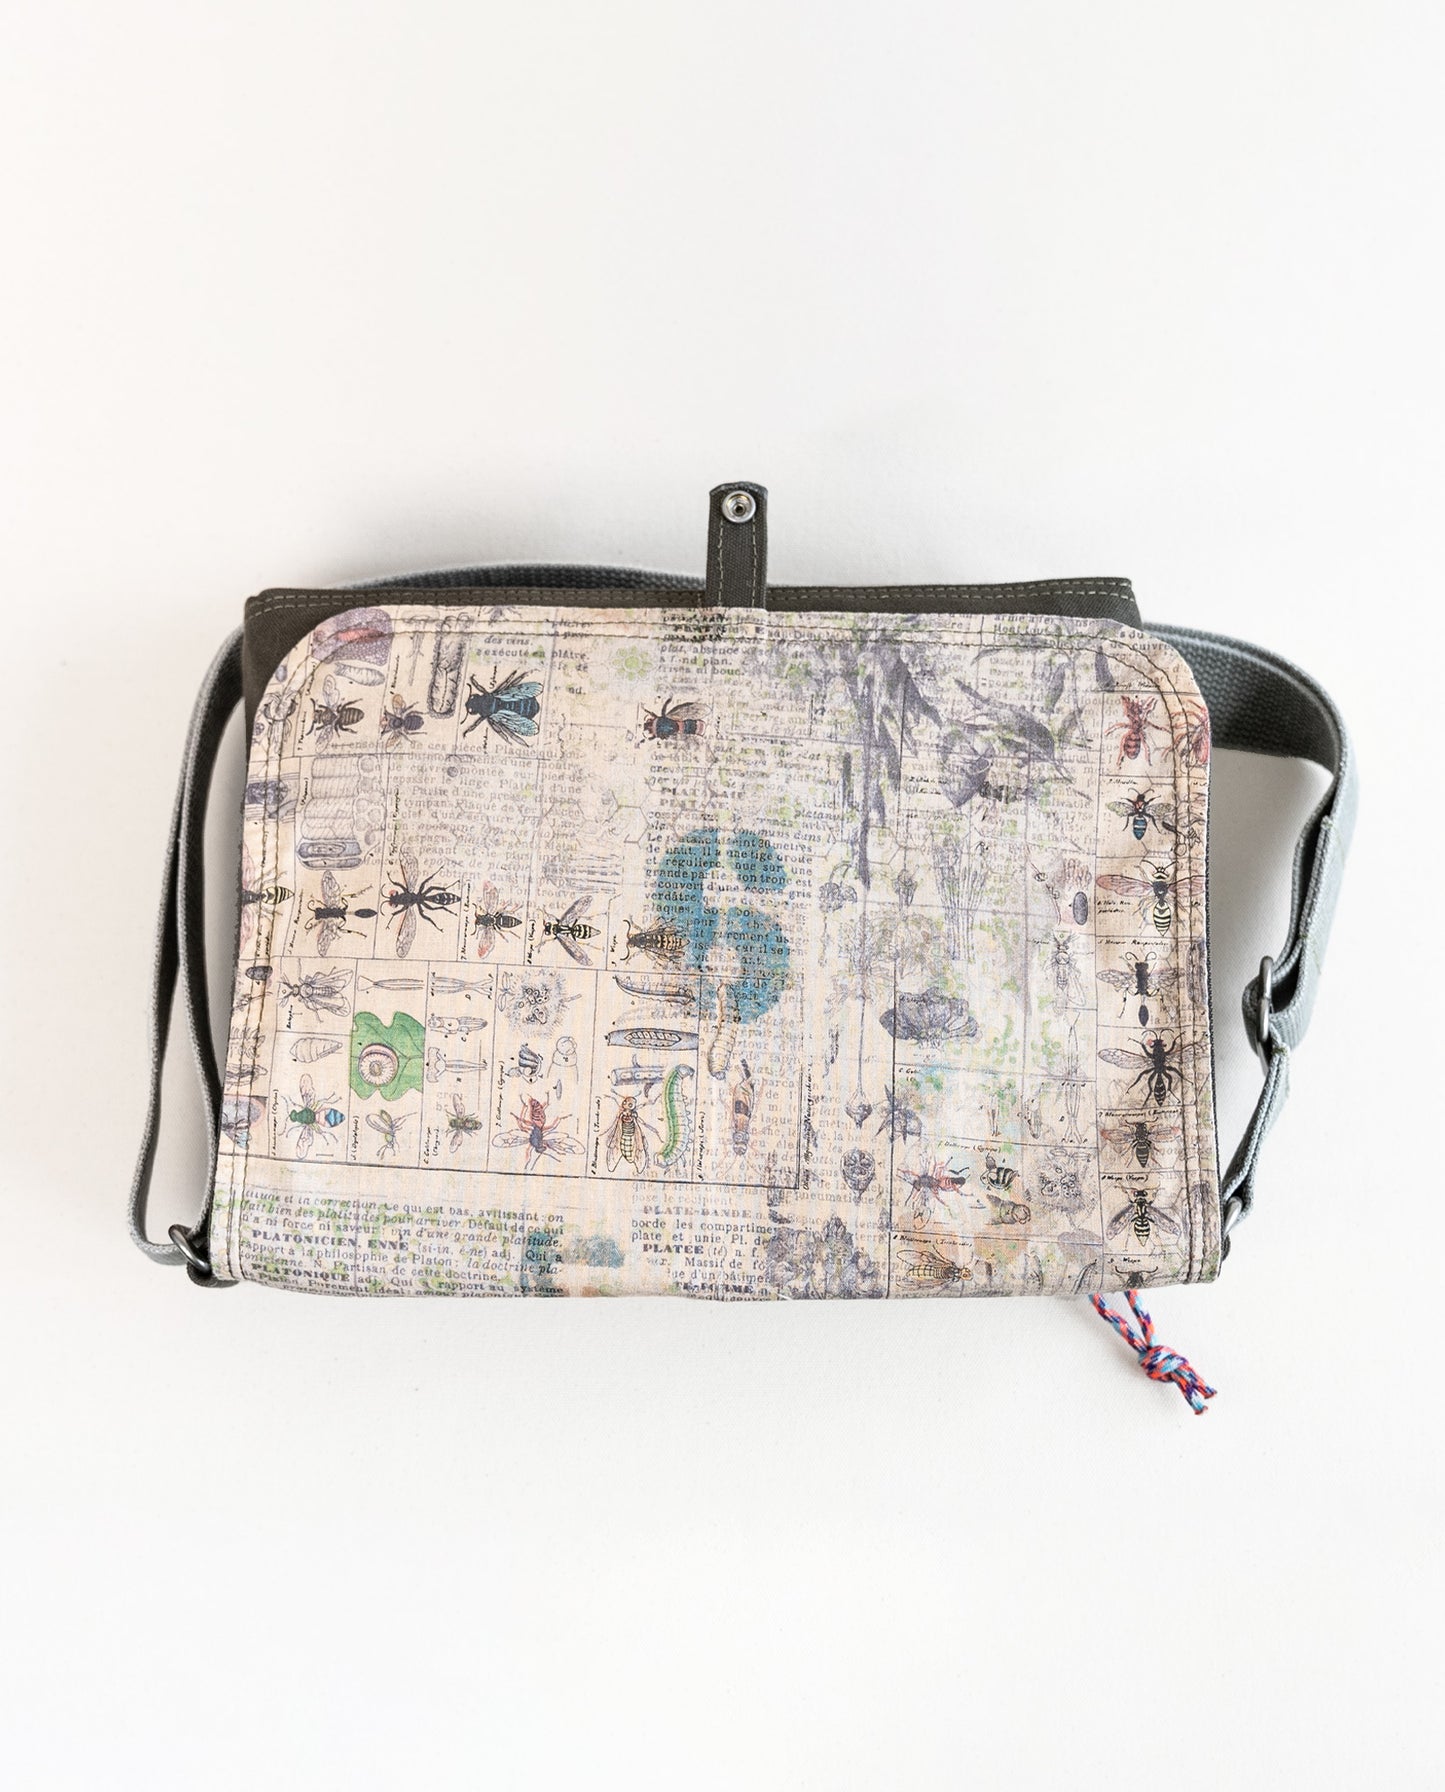 Inside of flap showing entomology print lining fabric of Dock 5’s River Otter Canvas Messenger Bag in olive featuring art from owner Natalija Walbridge